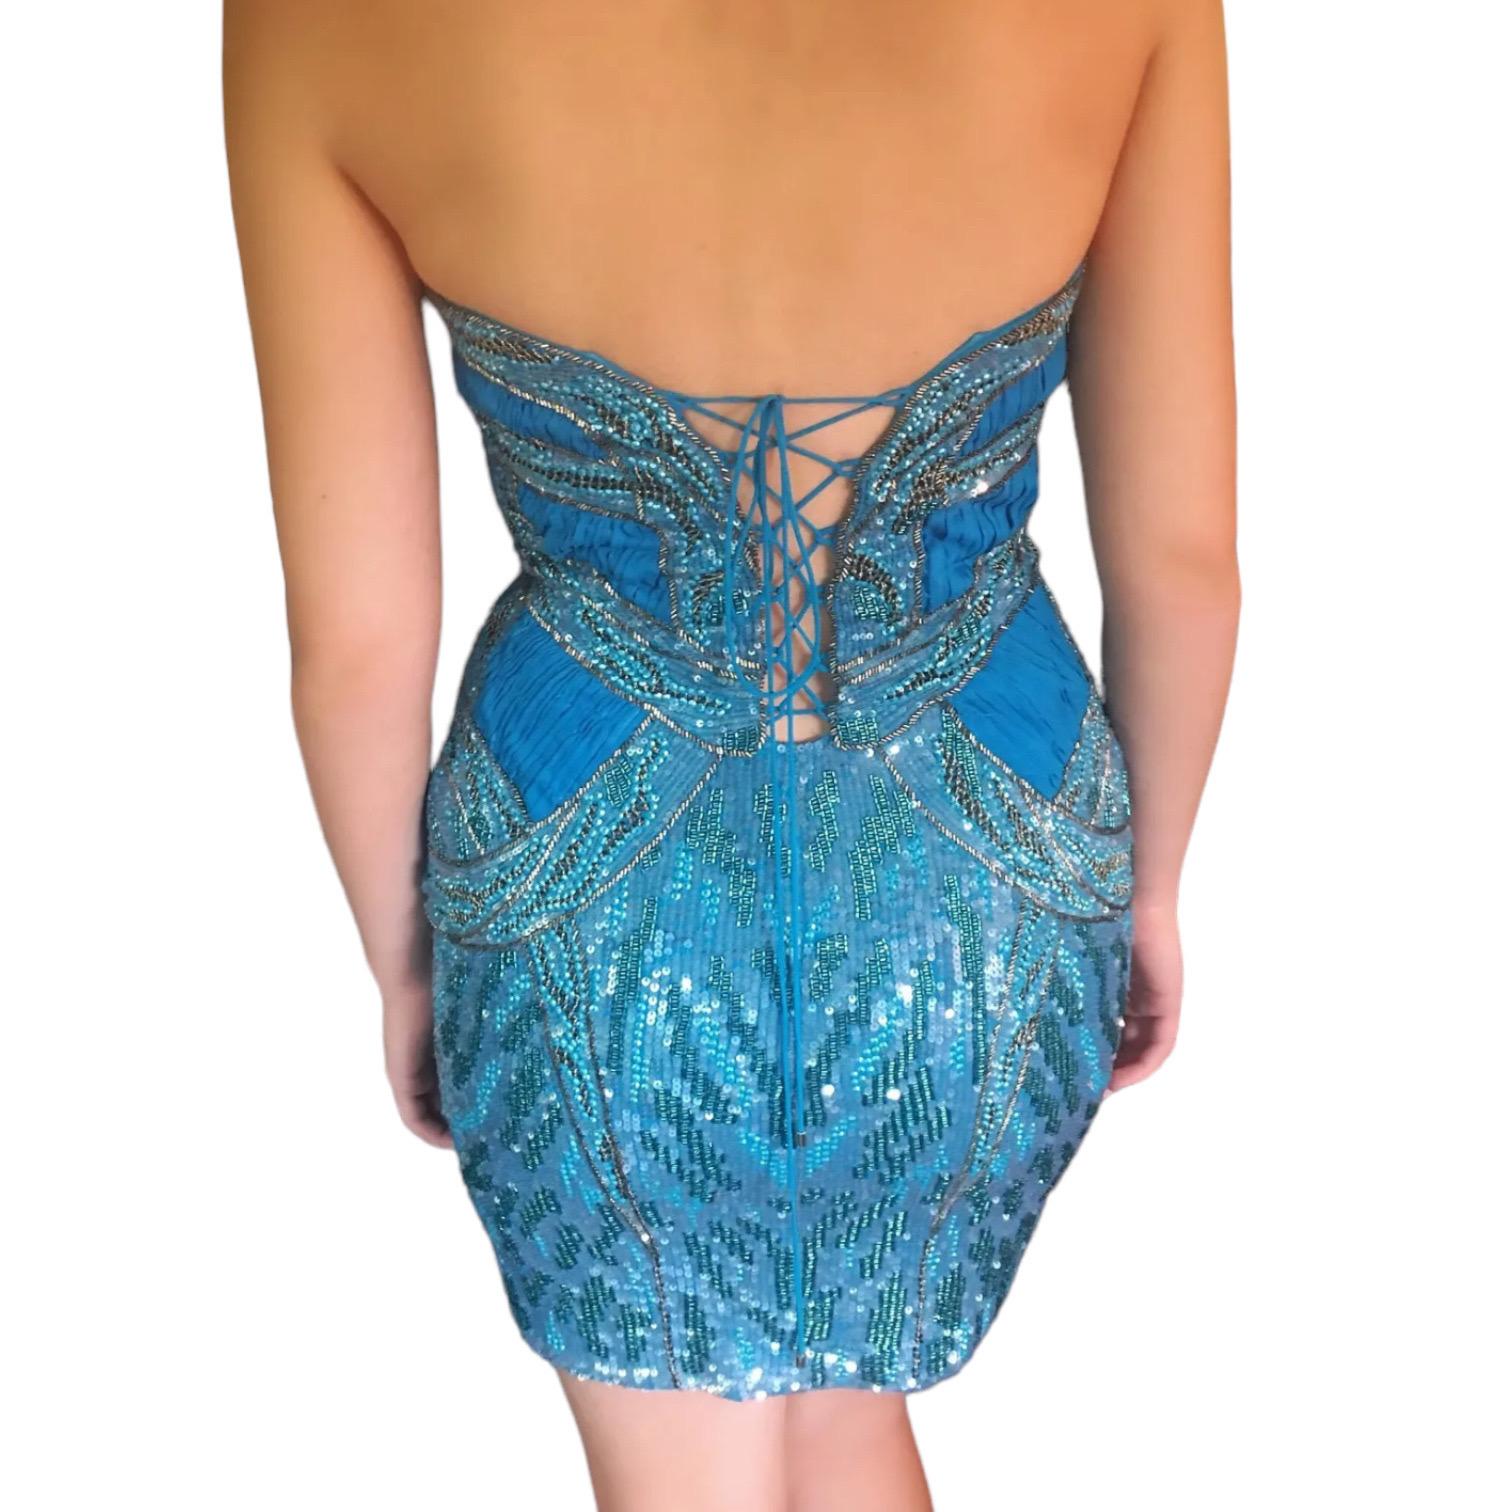 Roberto Cavalli Unworn c. 2012 Embelished Corset Lace Up Blue Mini Dress In New Condition For Sale In Naples, FL